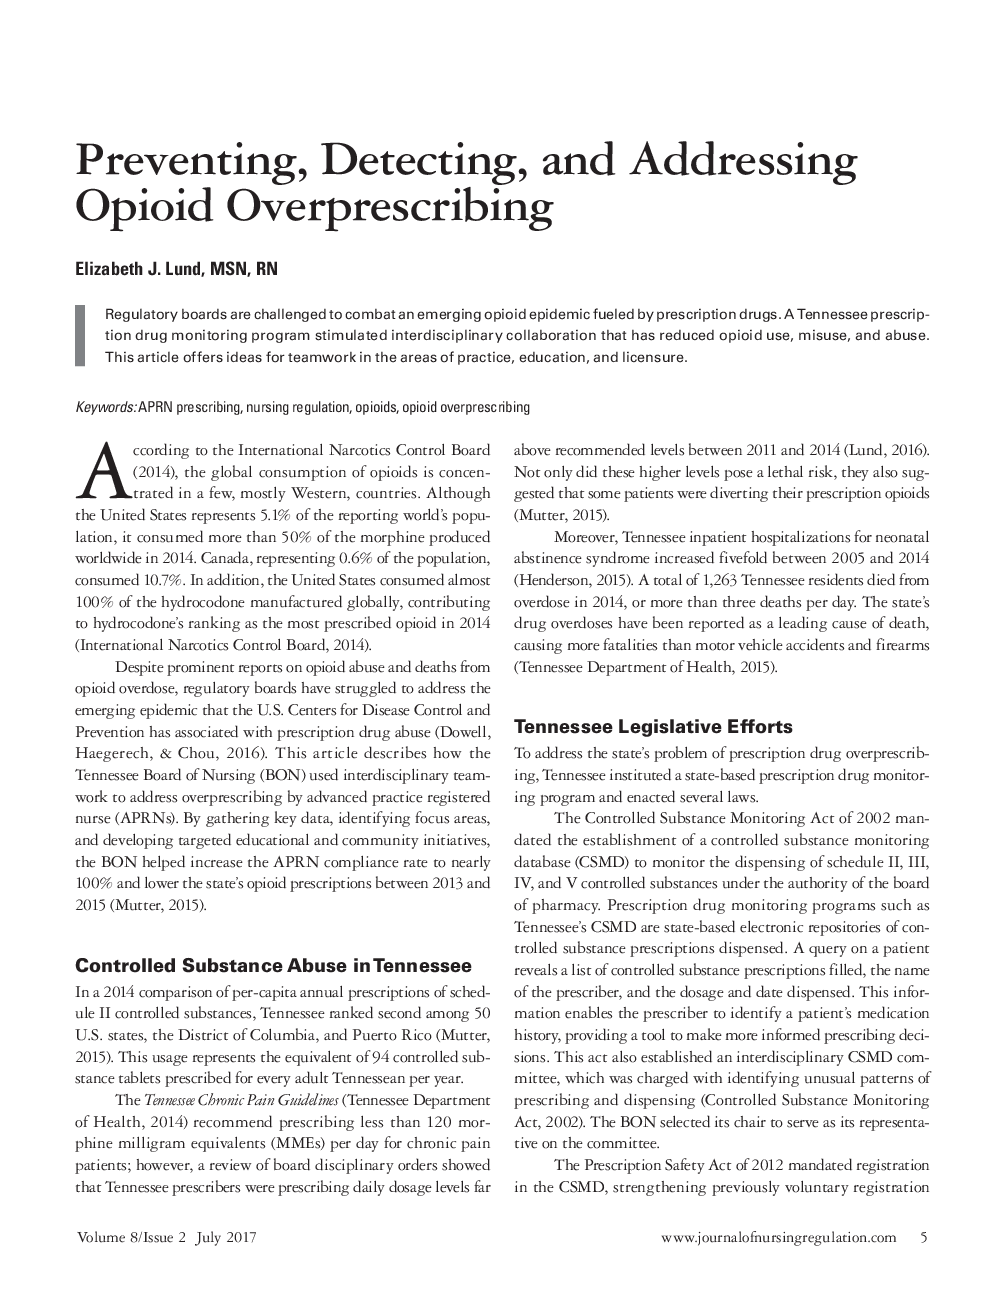 Preventing, Detecting, and Addressing Opioid Overprescribing